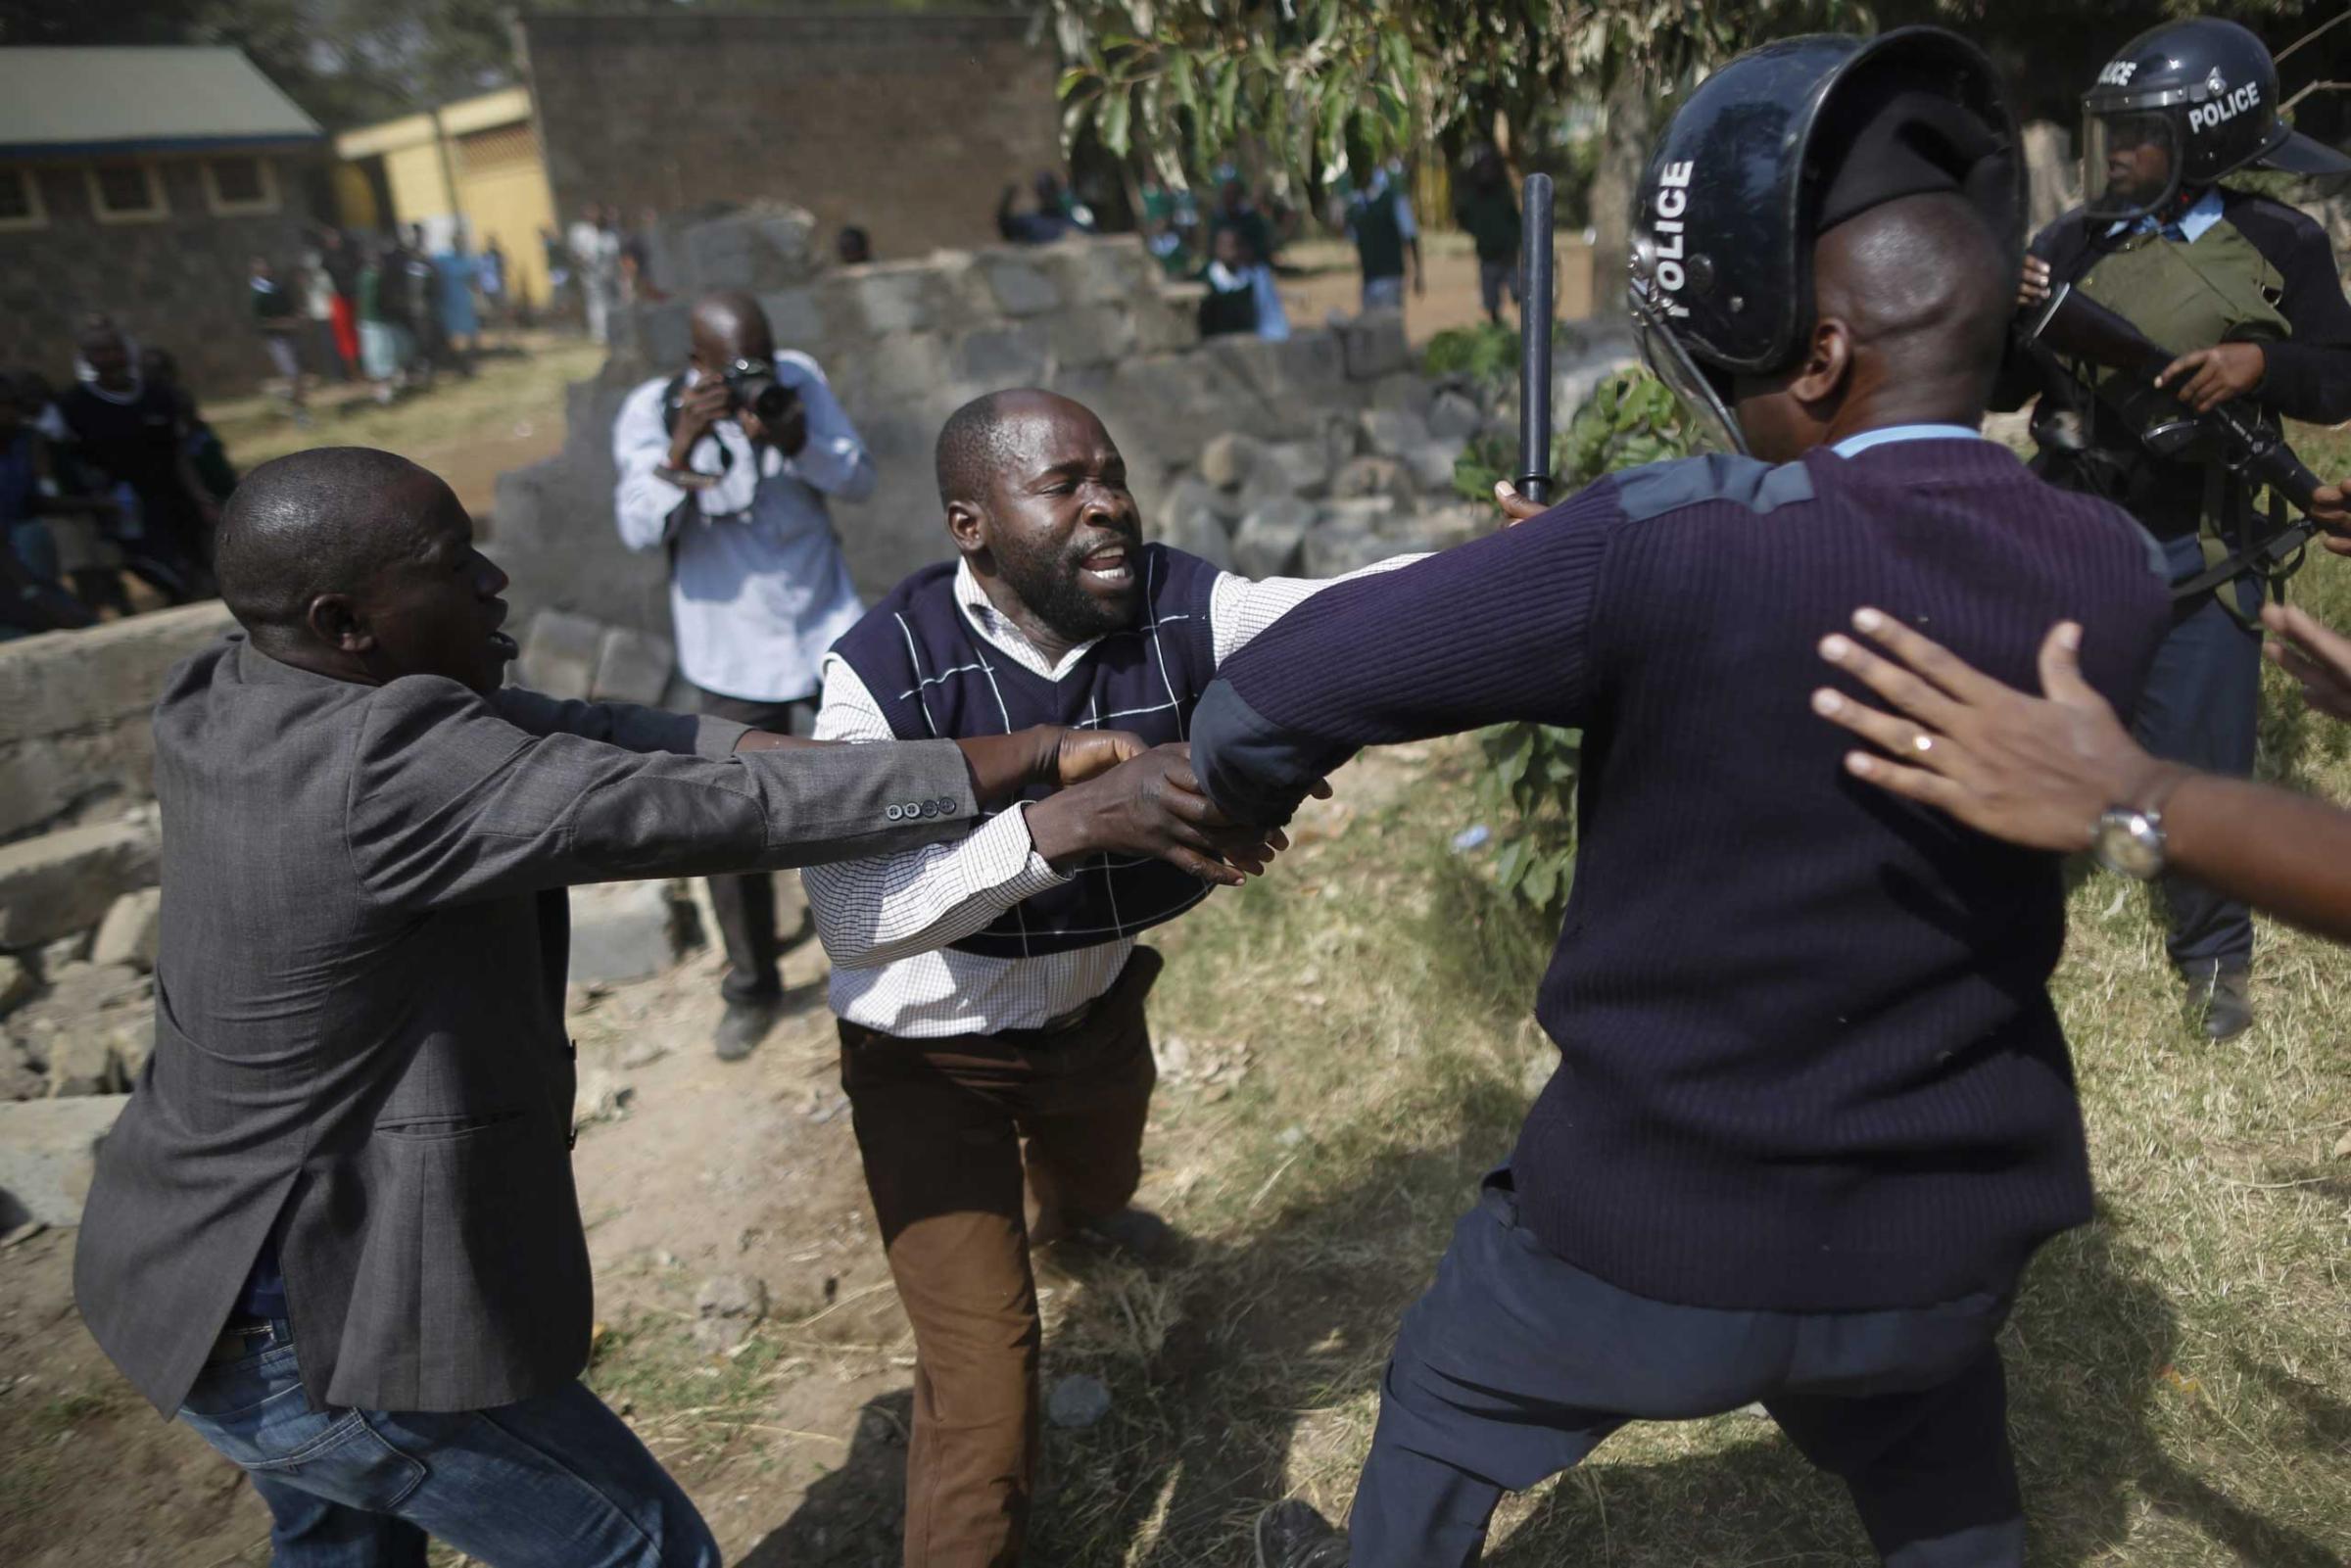 A protester clashes with a police officer during a protest against alleged land grabbing at Langata Road Primary School in Nairobi, Jan. 19, 2015.